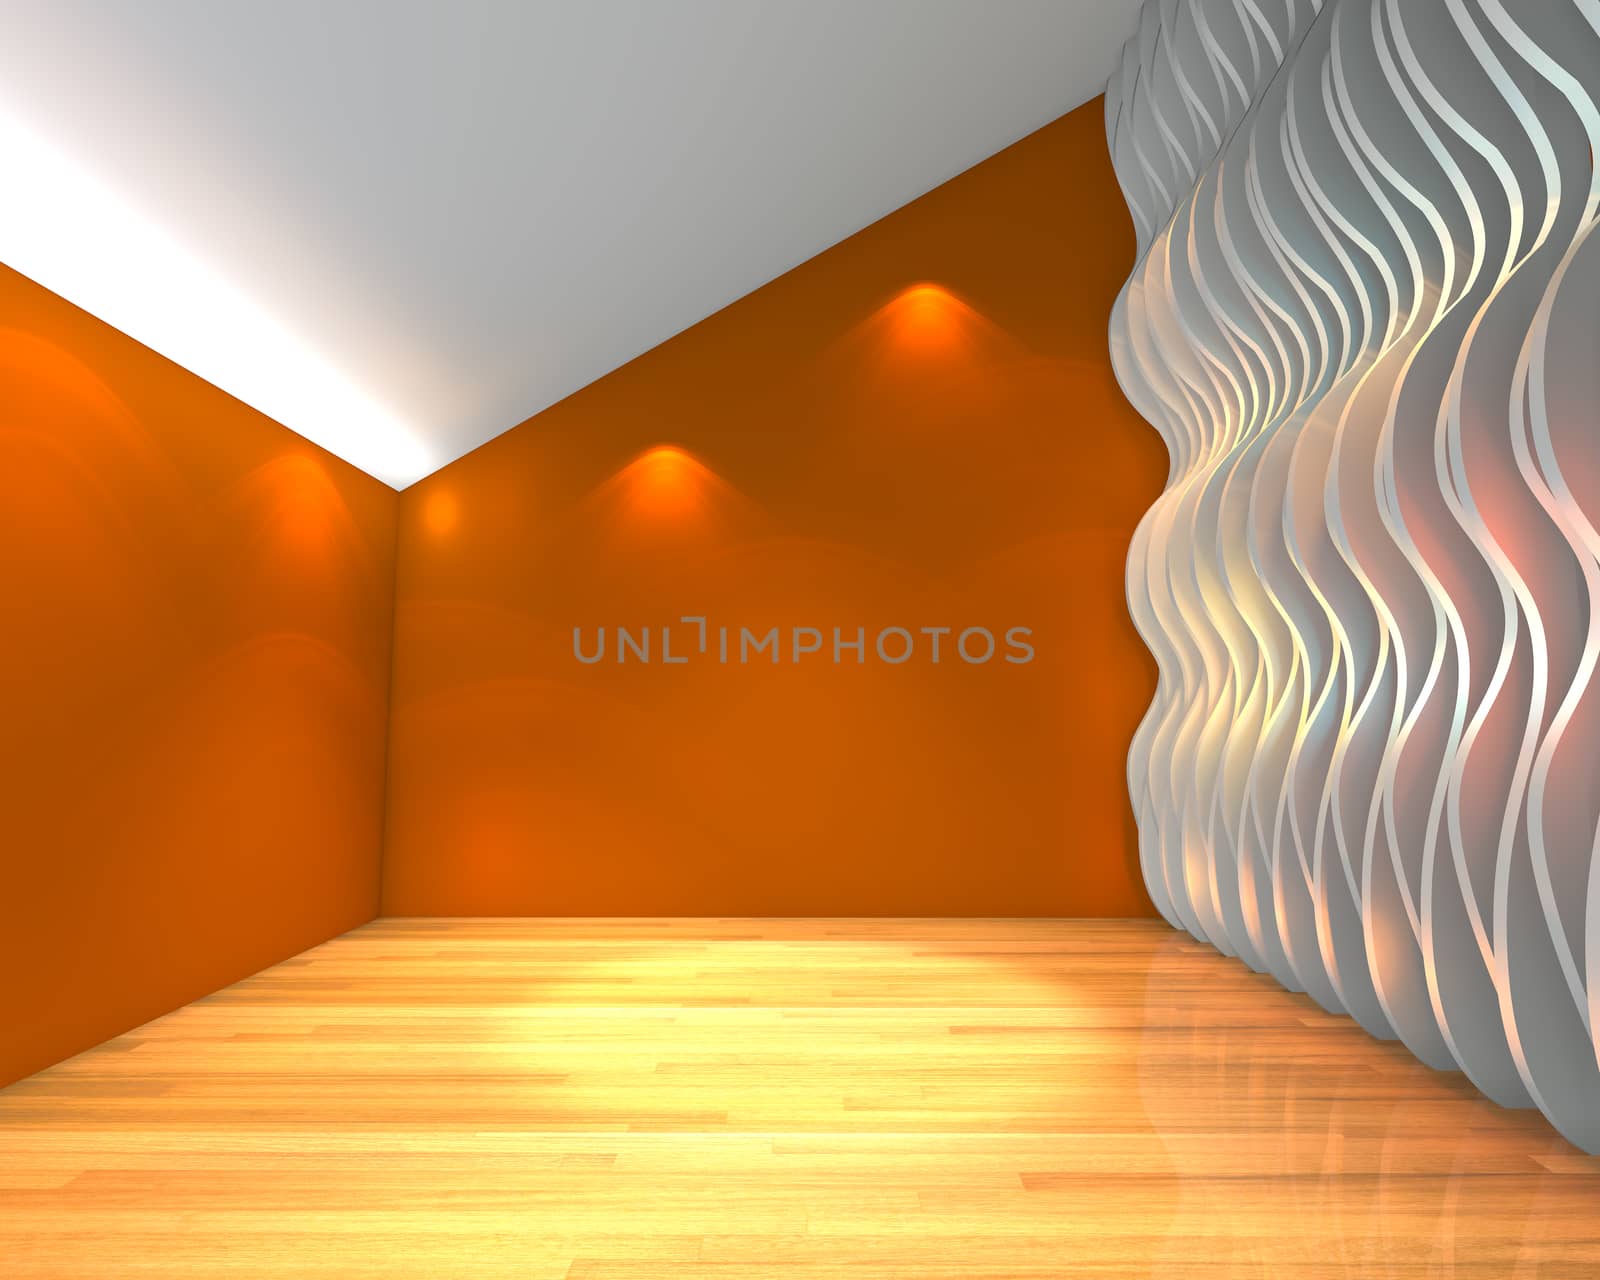 Abstract orange empty room with wave wall and decorated with wooden floors.